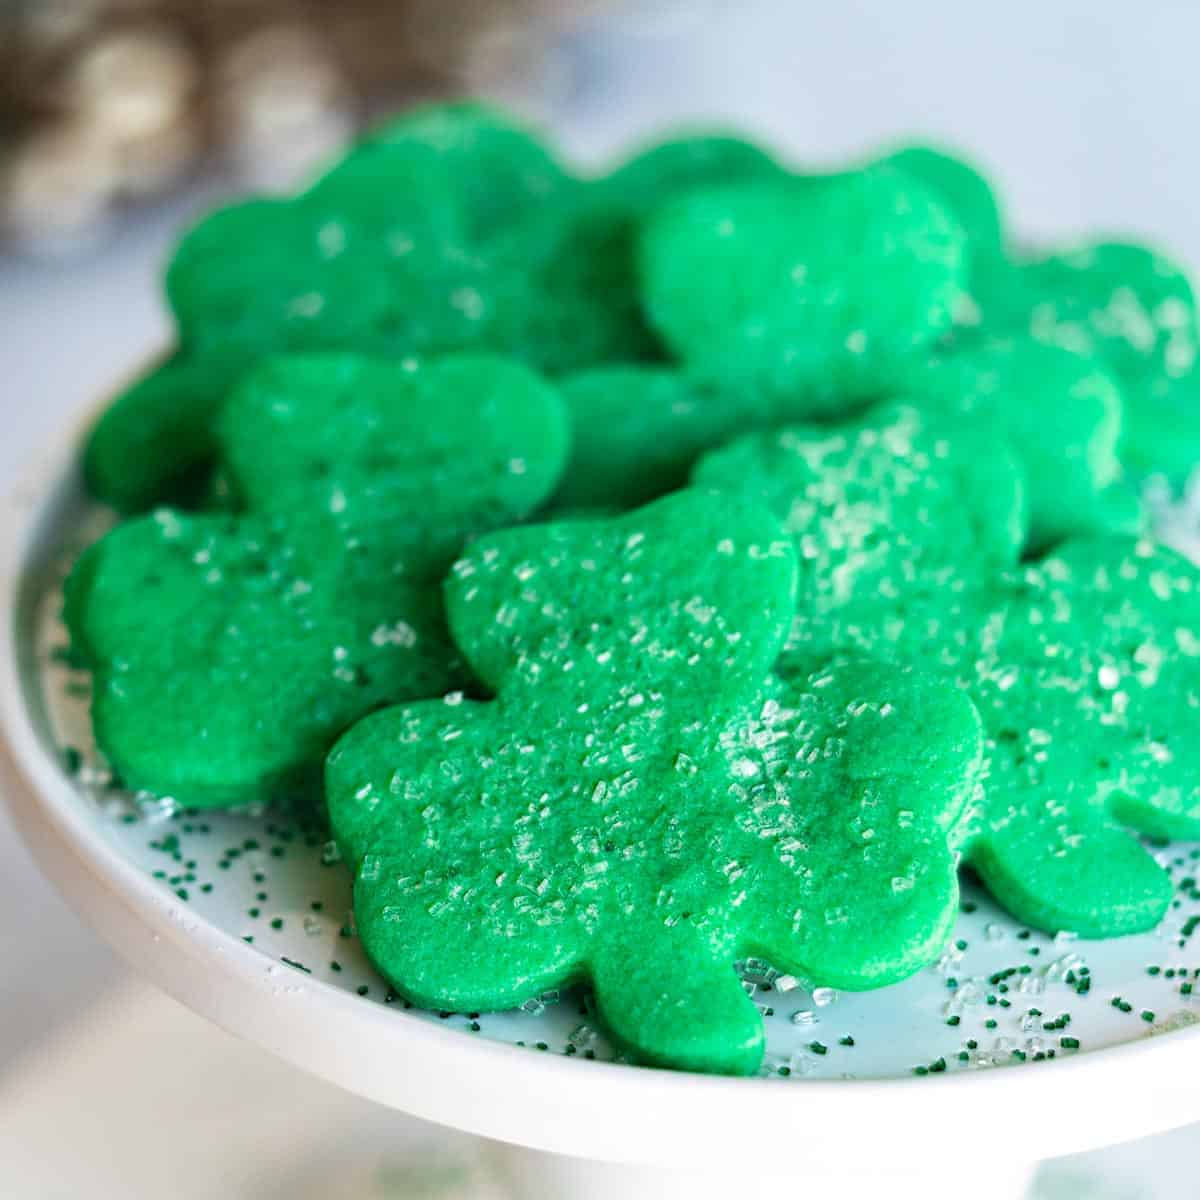 Ready to eat shamrock cookies on a white serving dish.